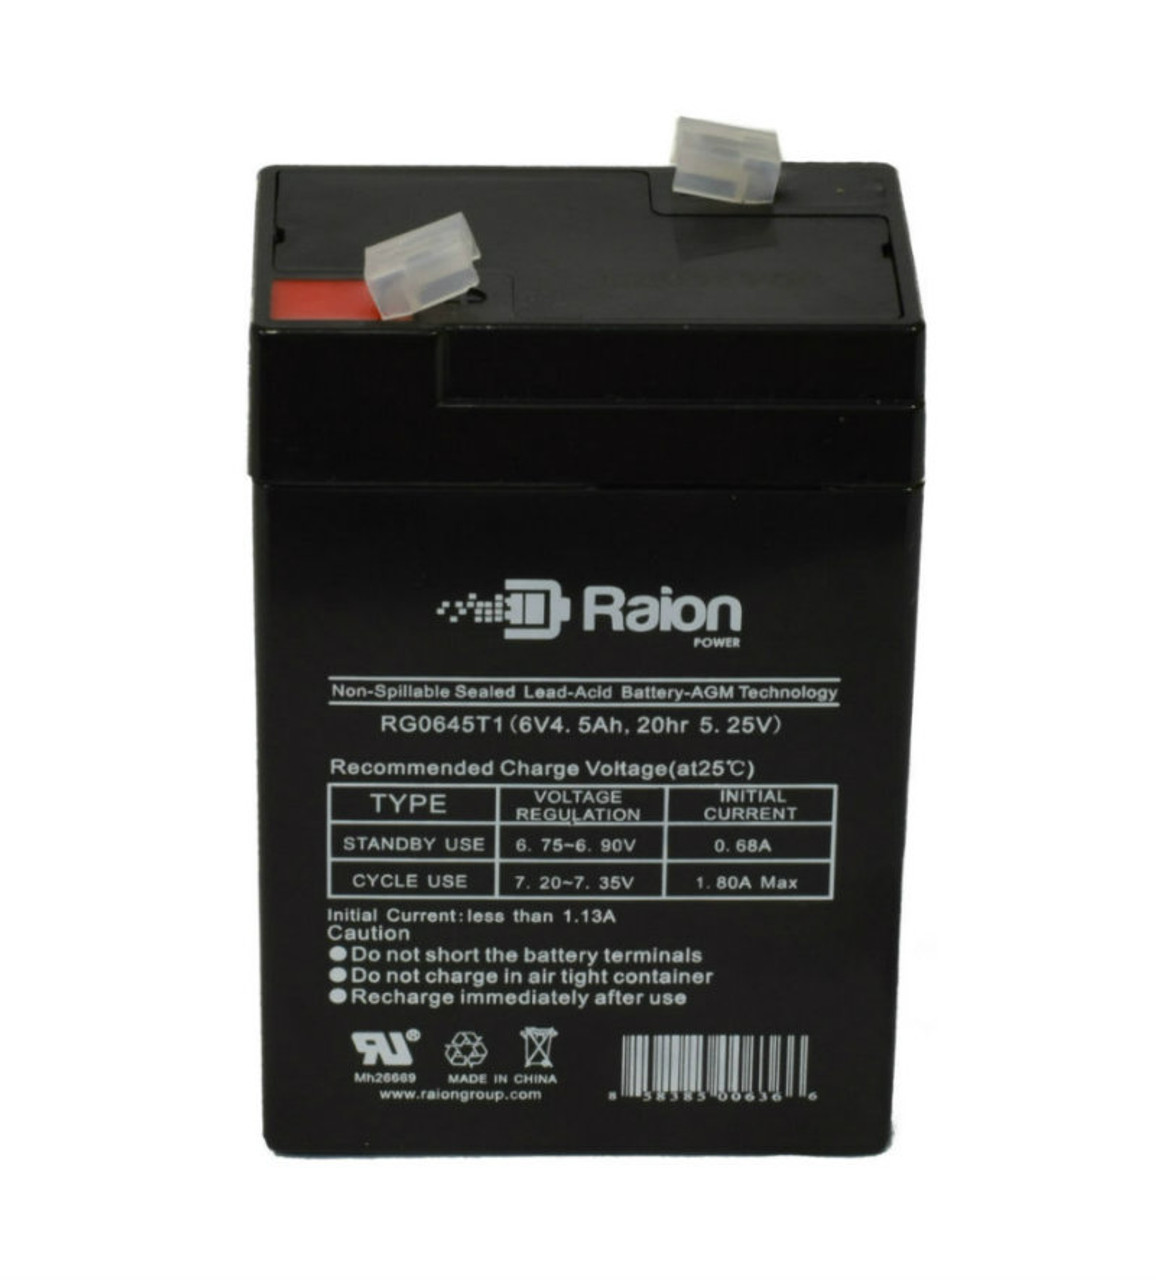 Raion Power RG0645T1 Replacement Battery Cartridge for McGaw 821 Intelligent